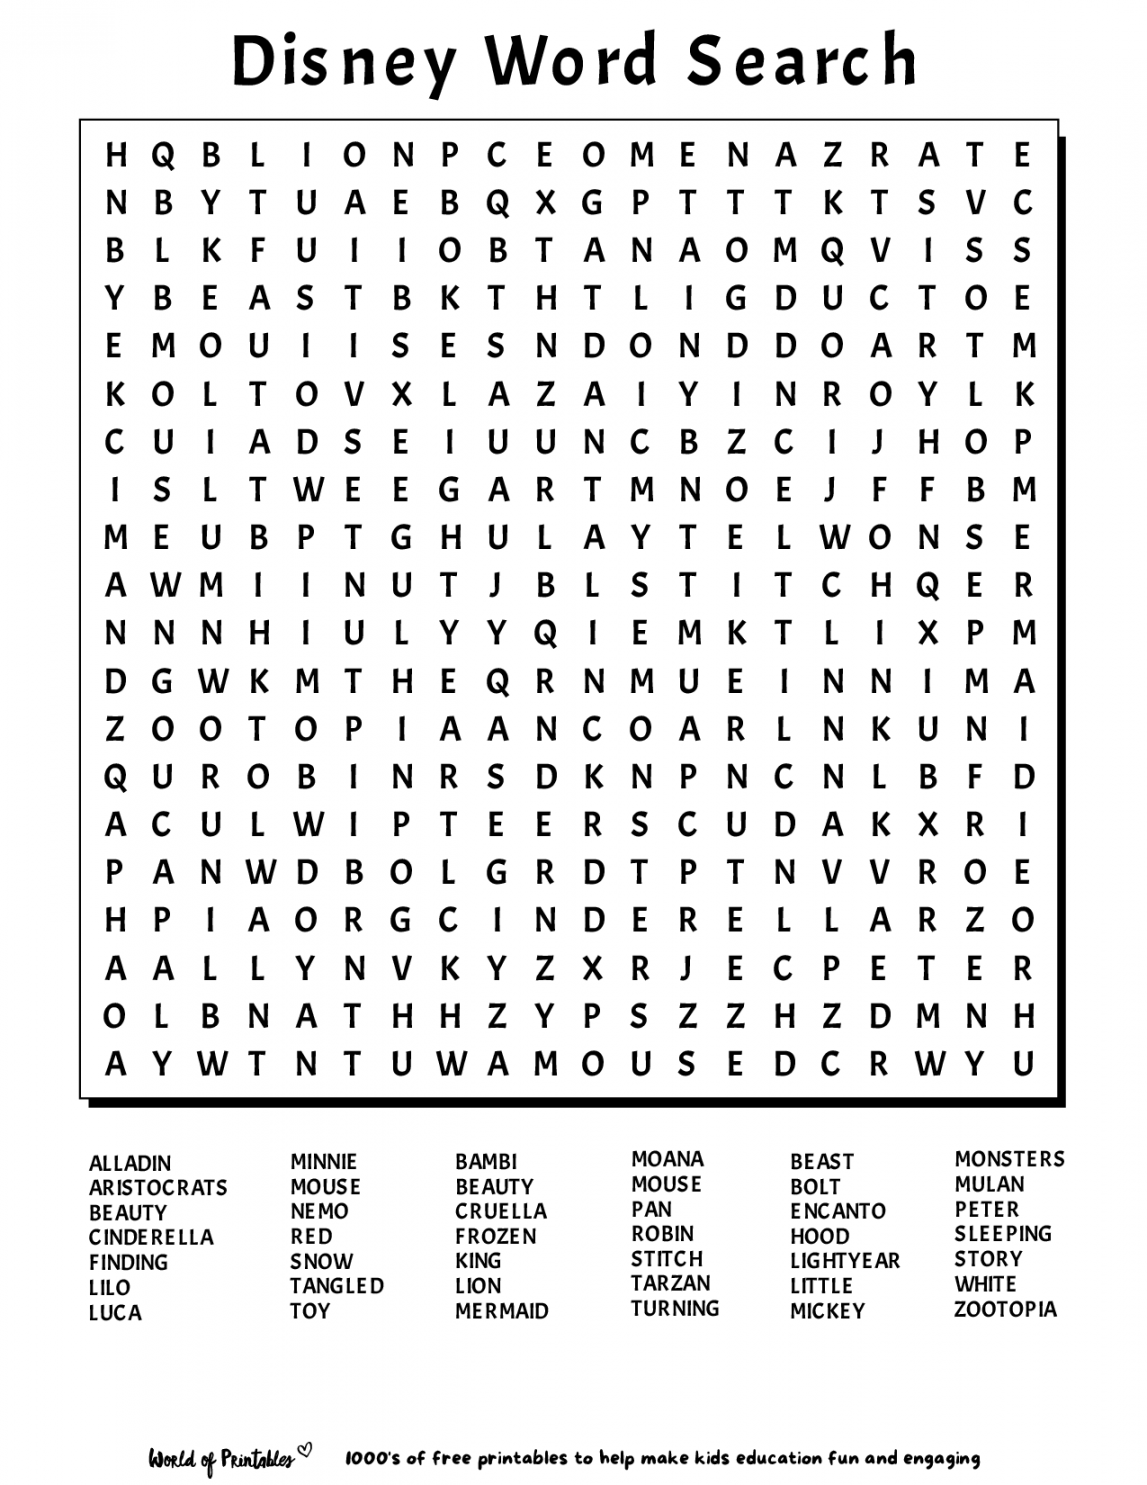 Free Word Search Printable For Adults - Printable - Printable Word Search  World of Printables